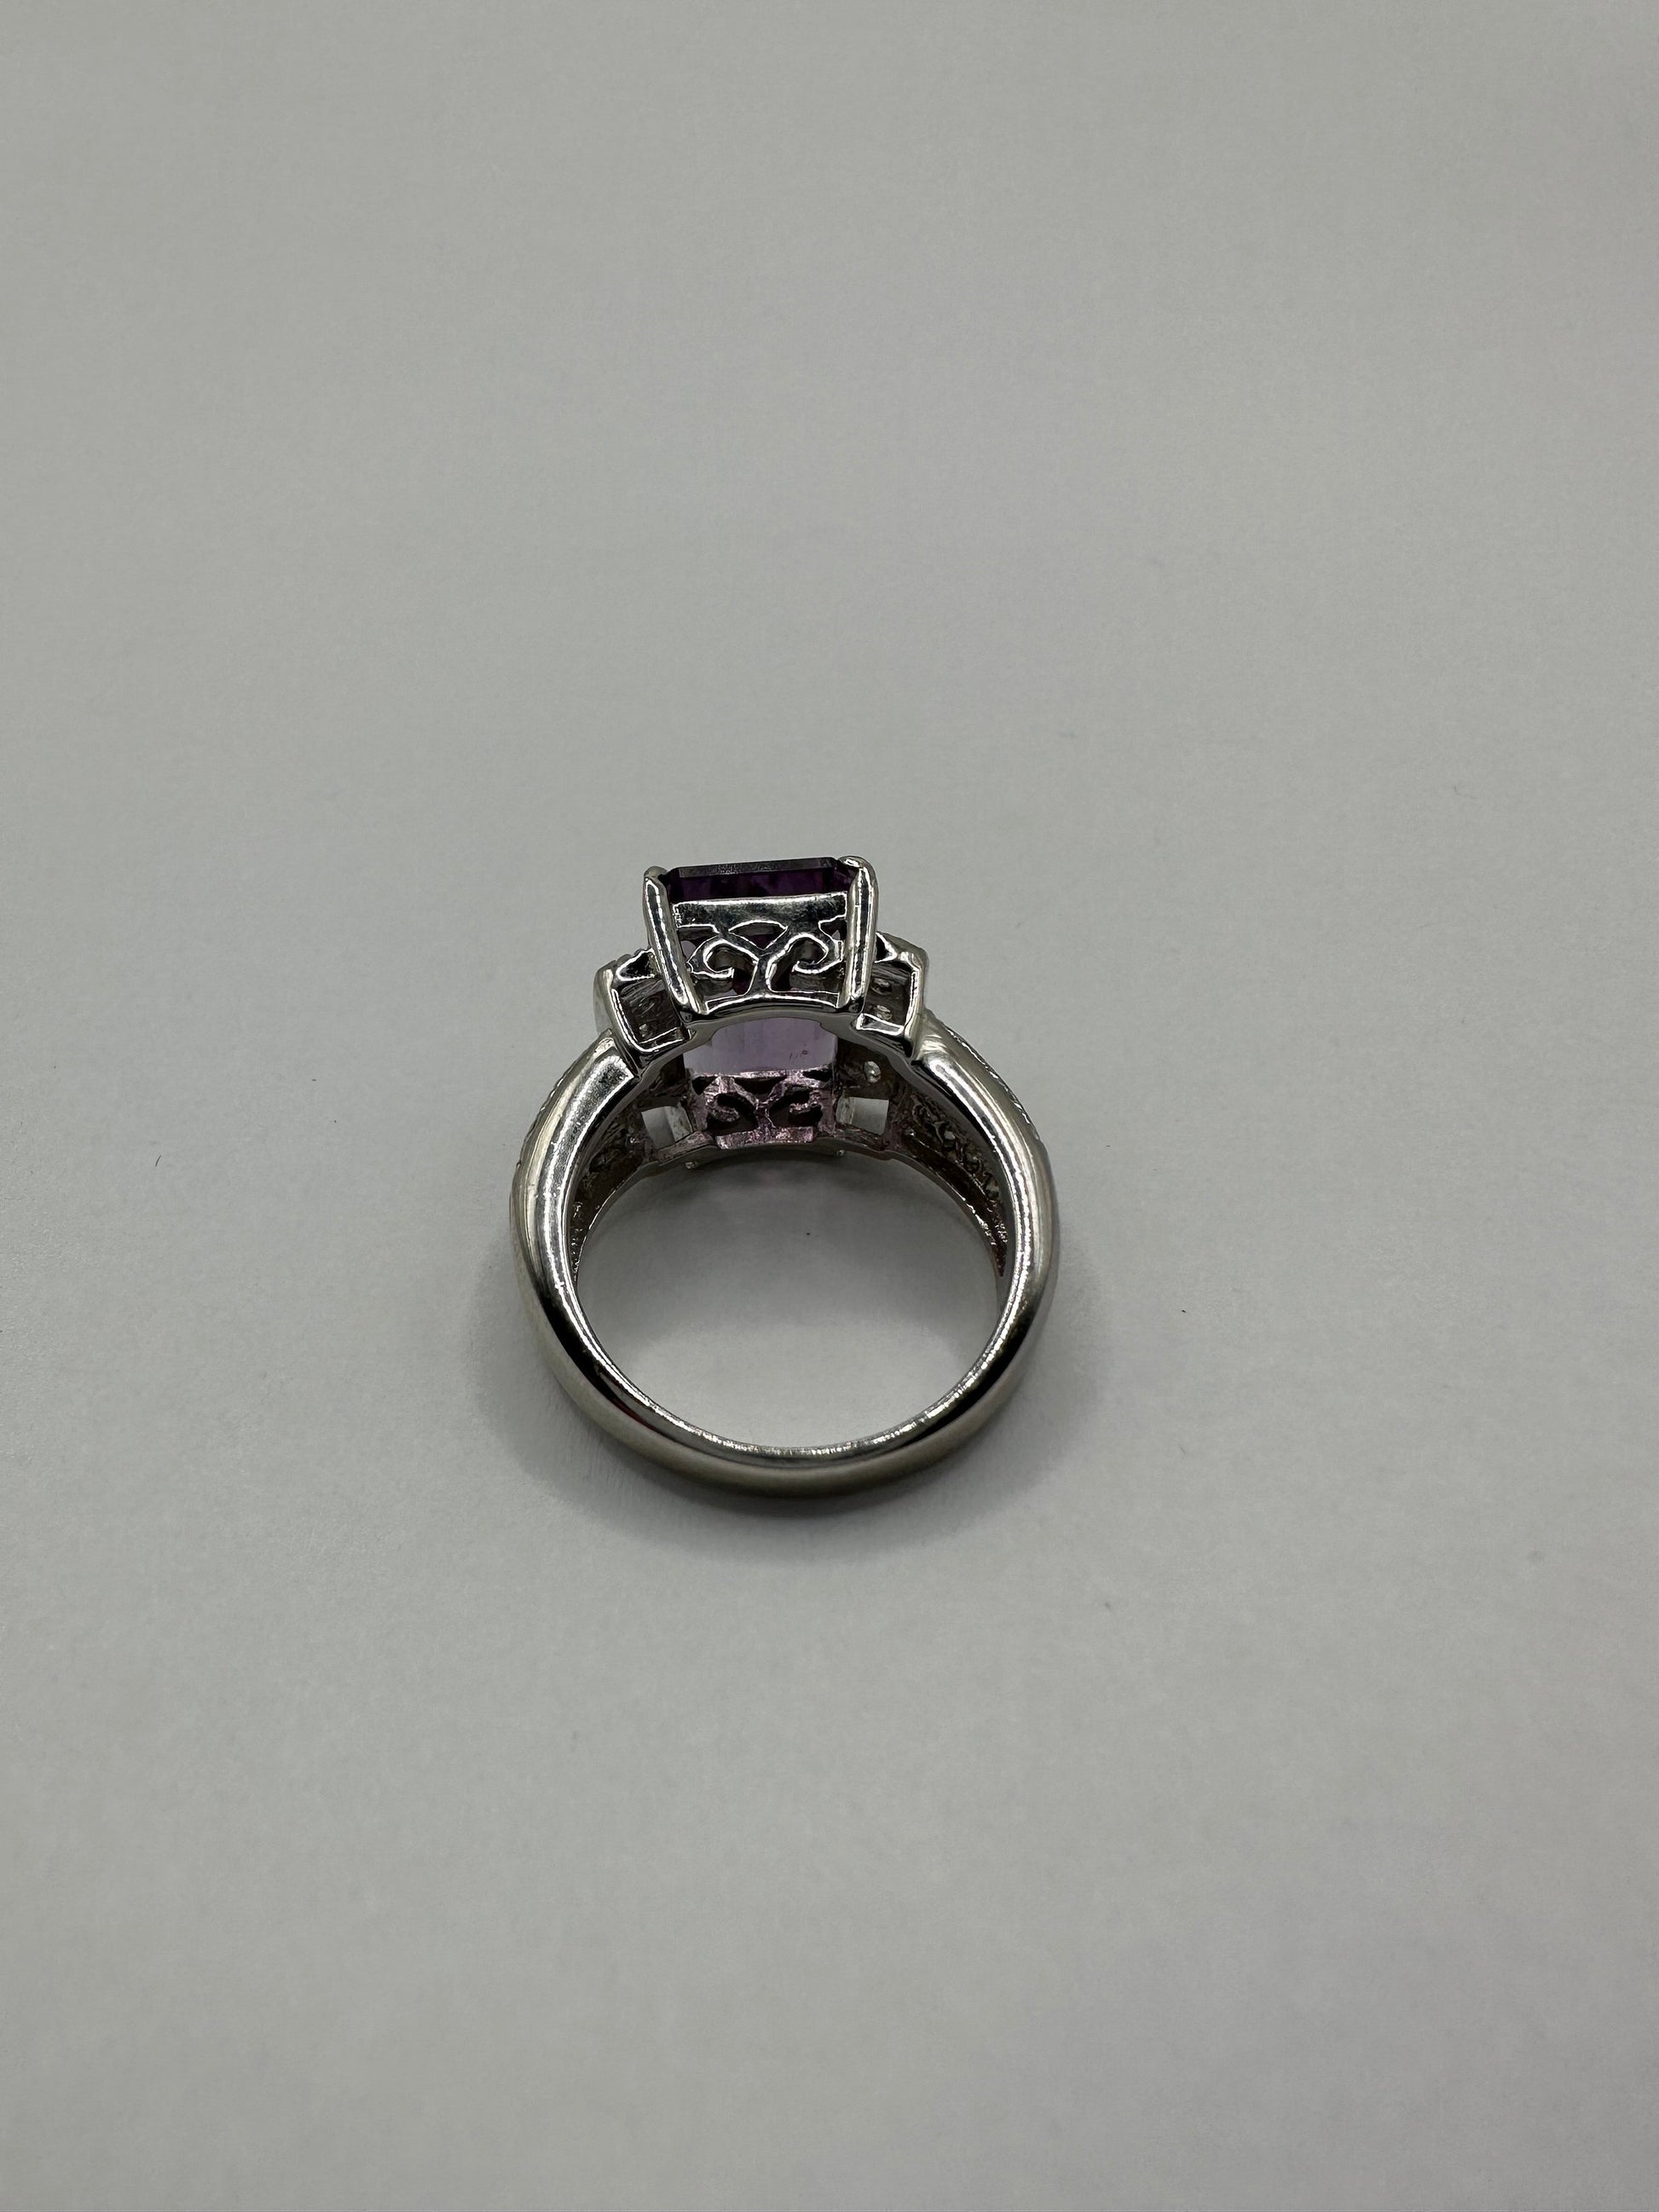 Vintage Purple Amethyst Ring 925 Sterling Silver Deco Size 7